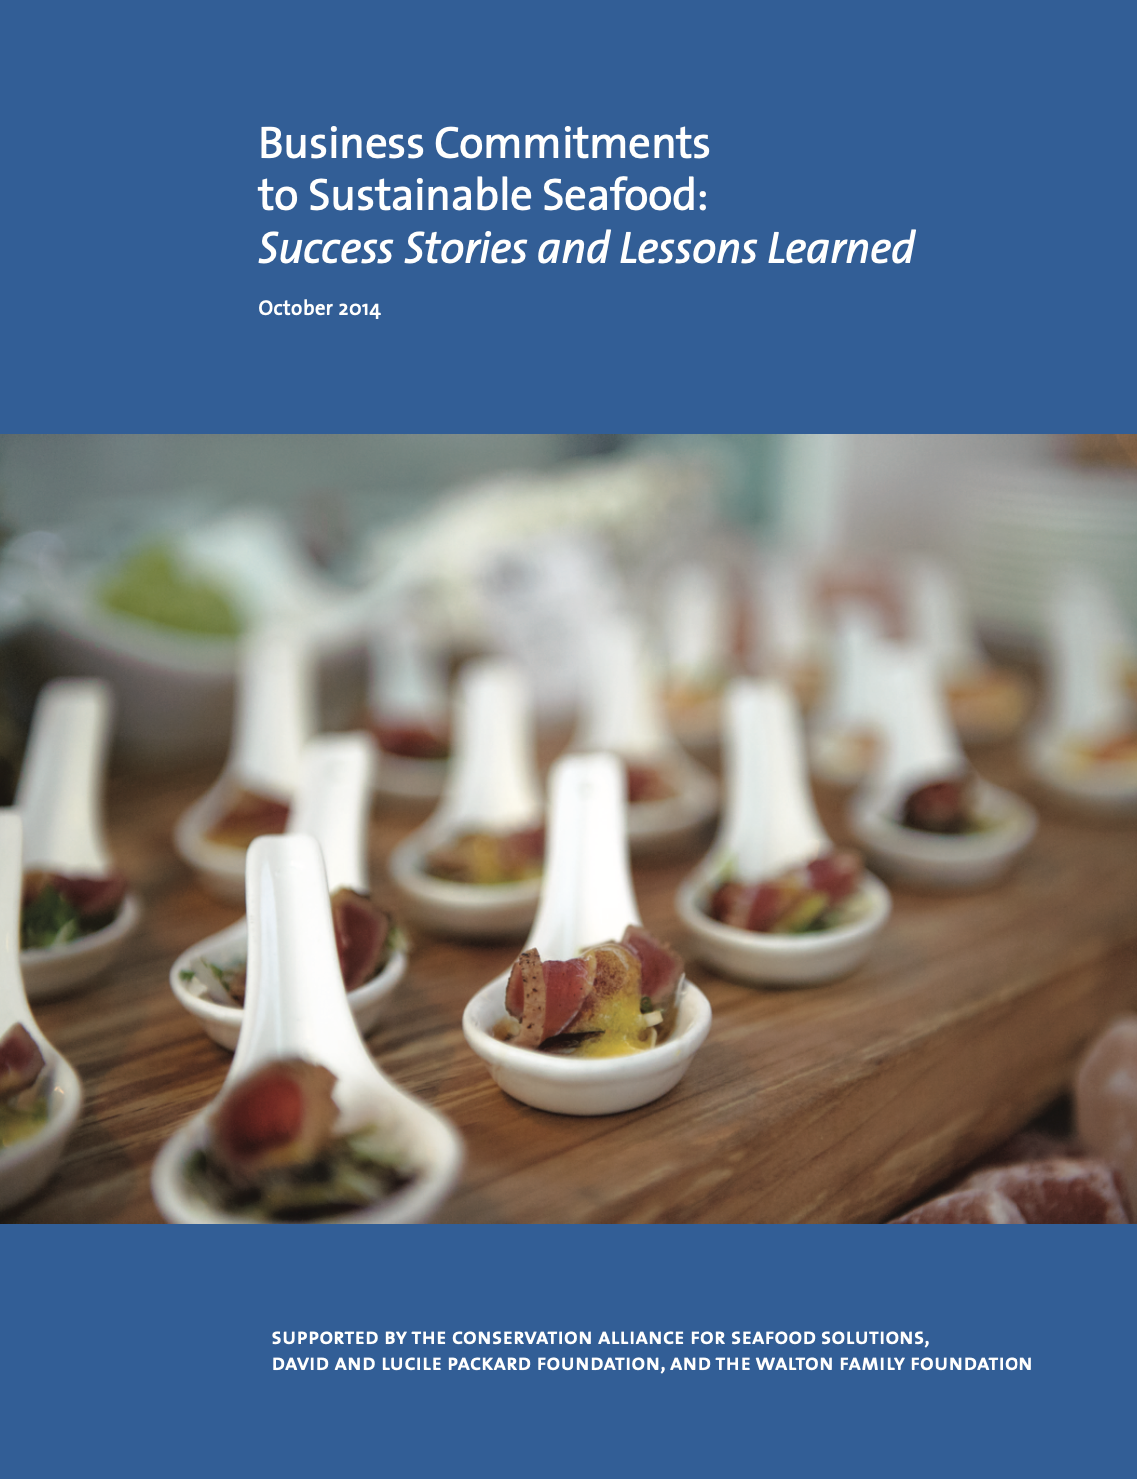 Business Commitments to Sustainable Seafood: Success Stories and Lessons Learned